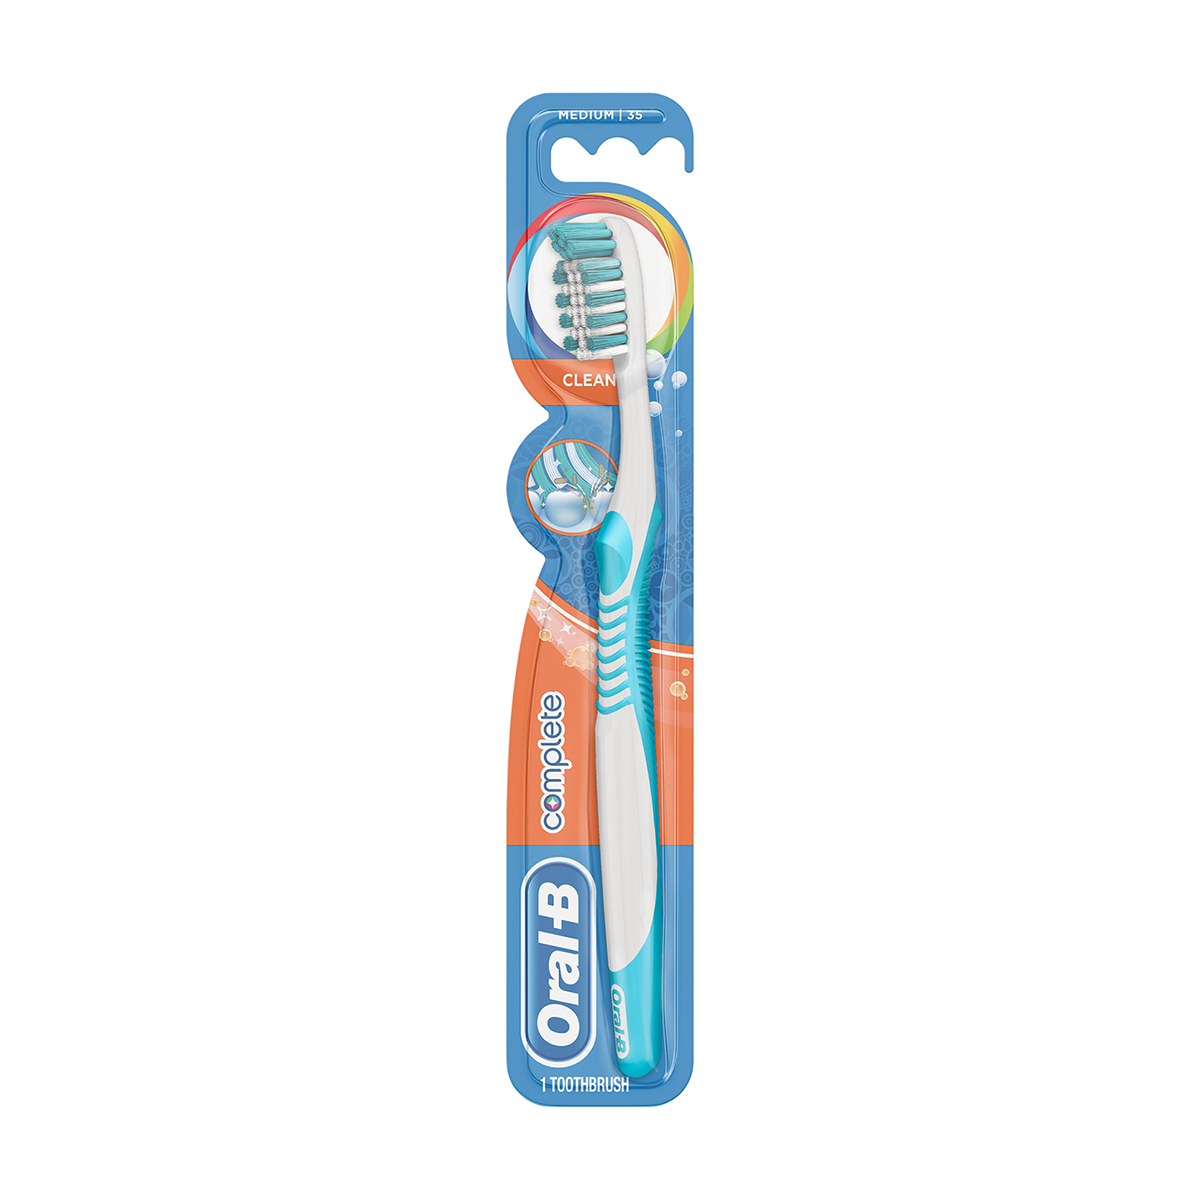 Oral B Complete - Oral-B Complete Clean Toothbrush undefined